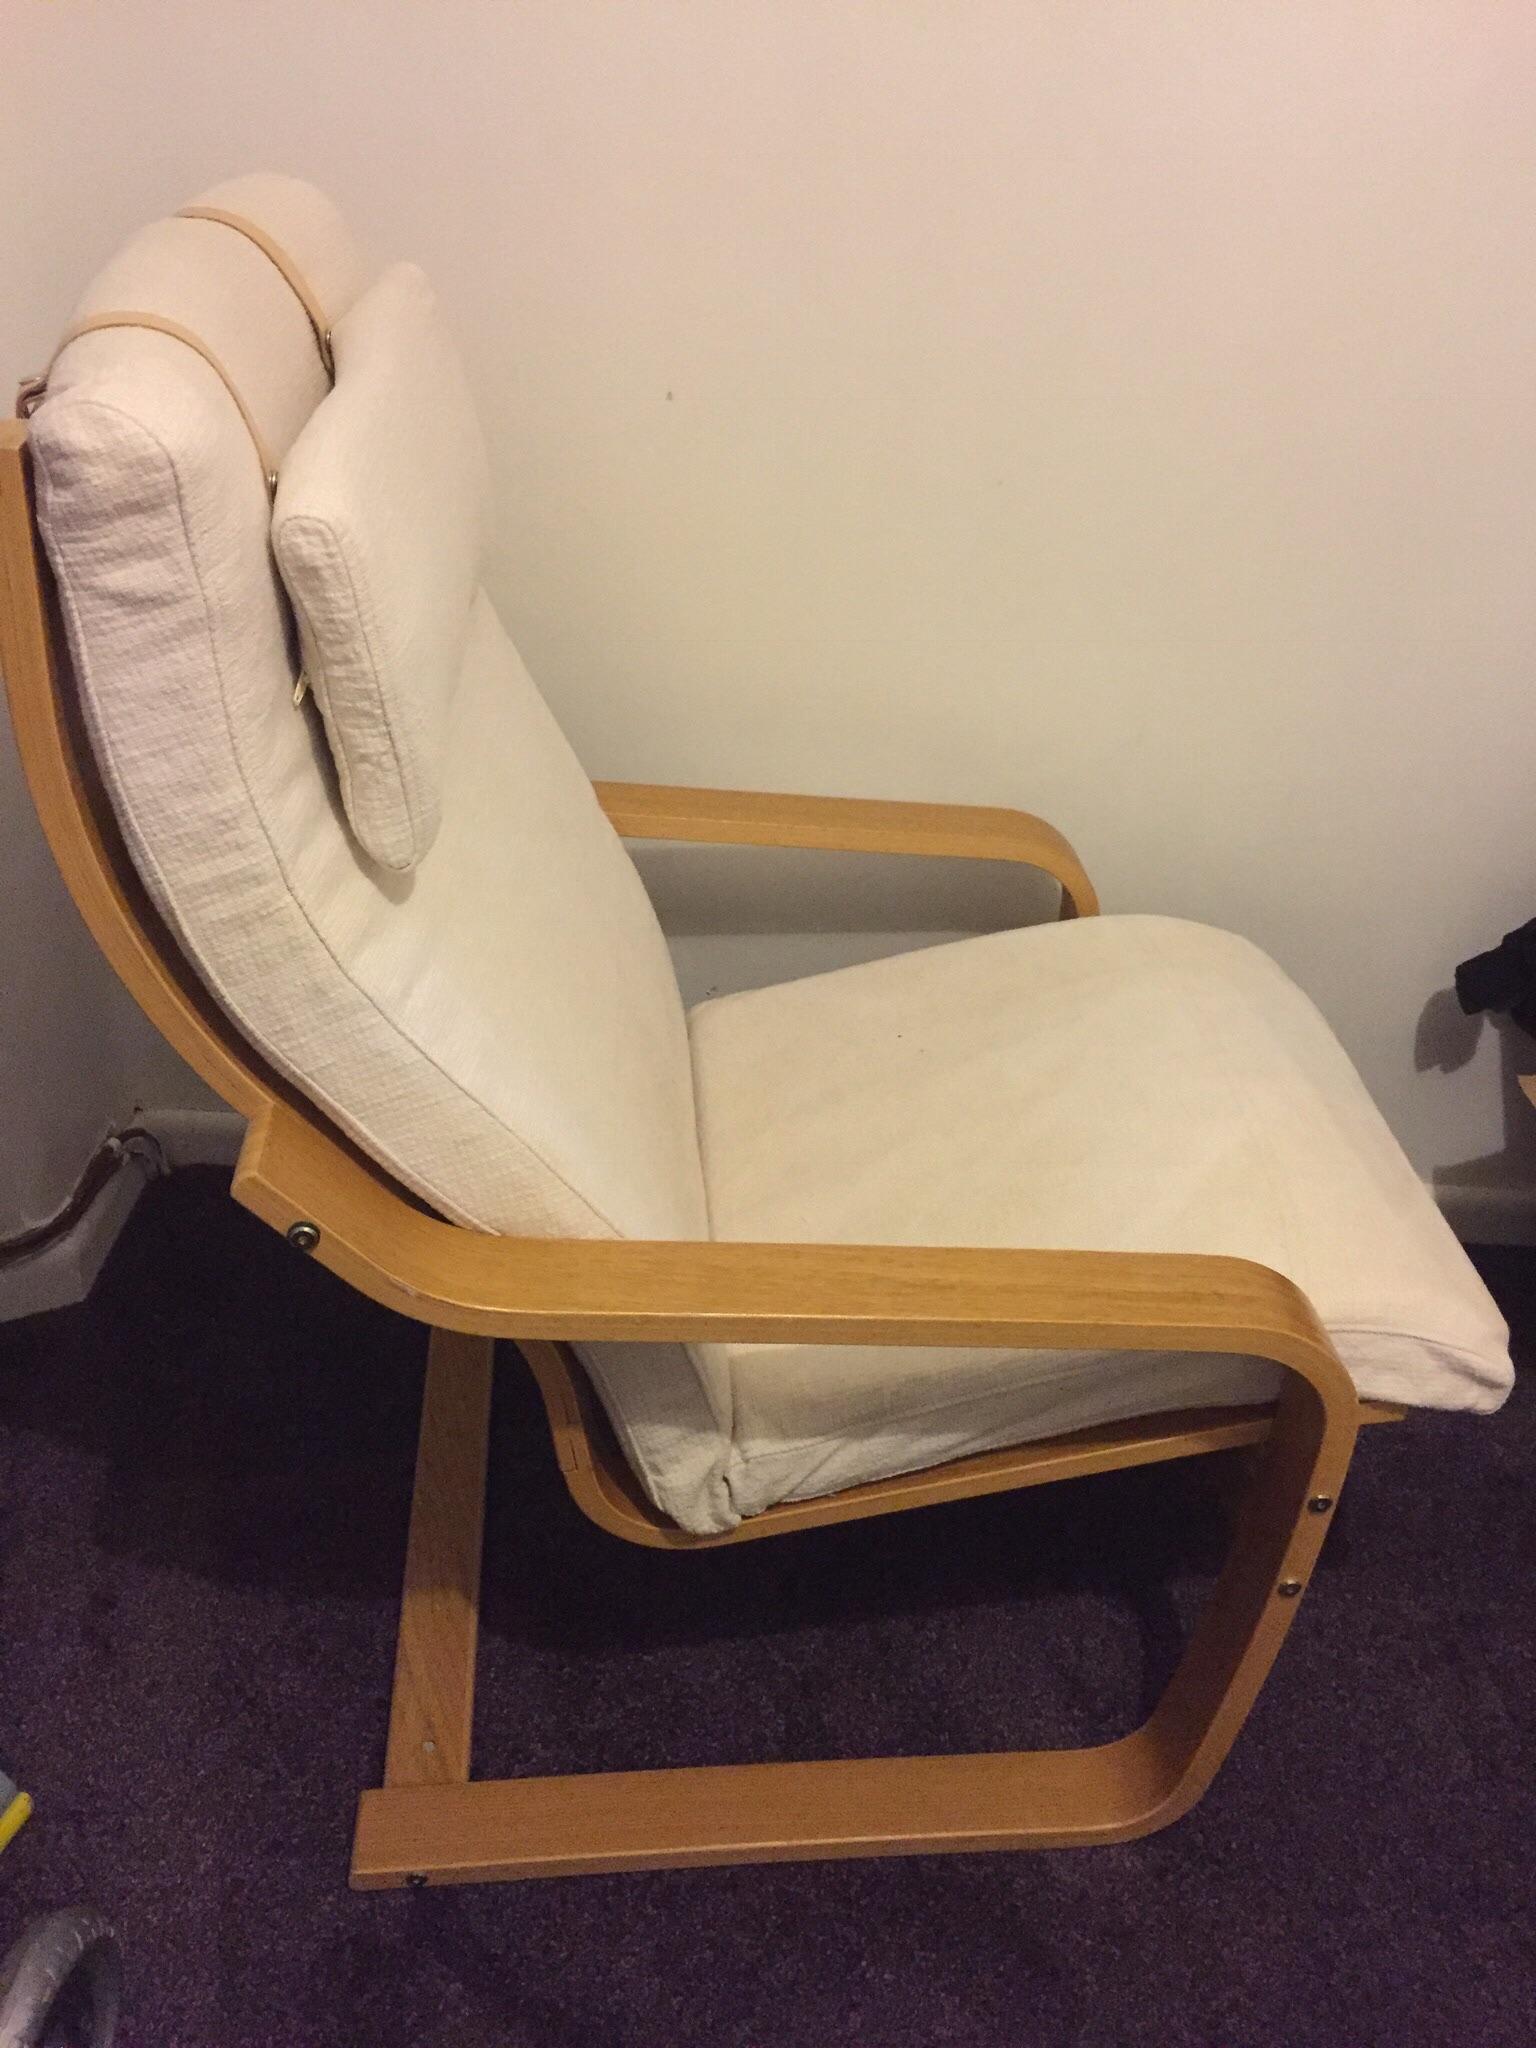 Ikea Poang Chair In Fy6 Fylde For 20 00 For Sale Shpock